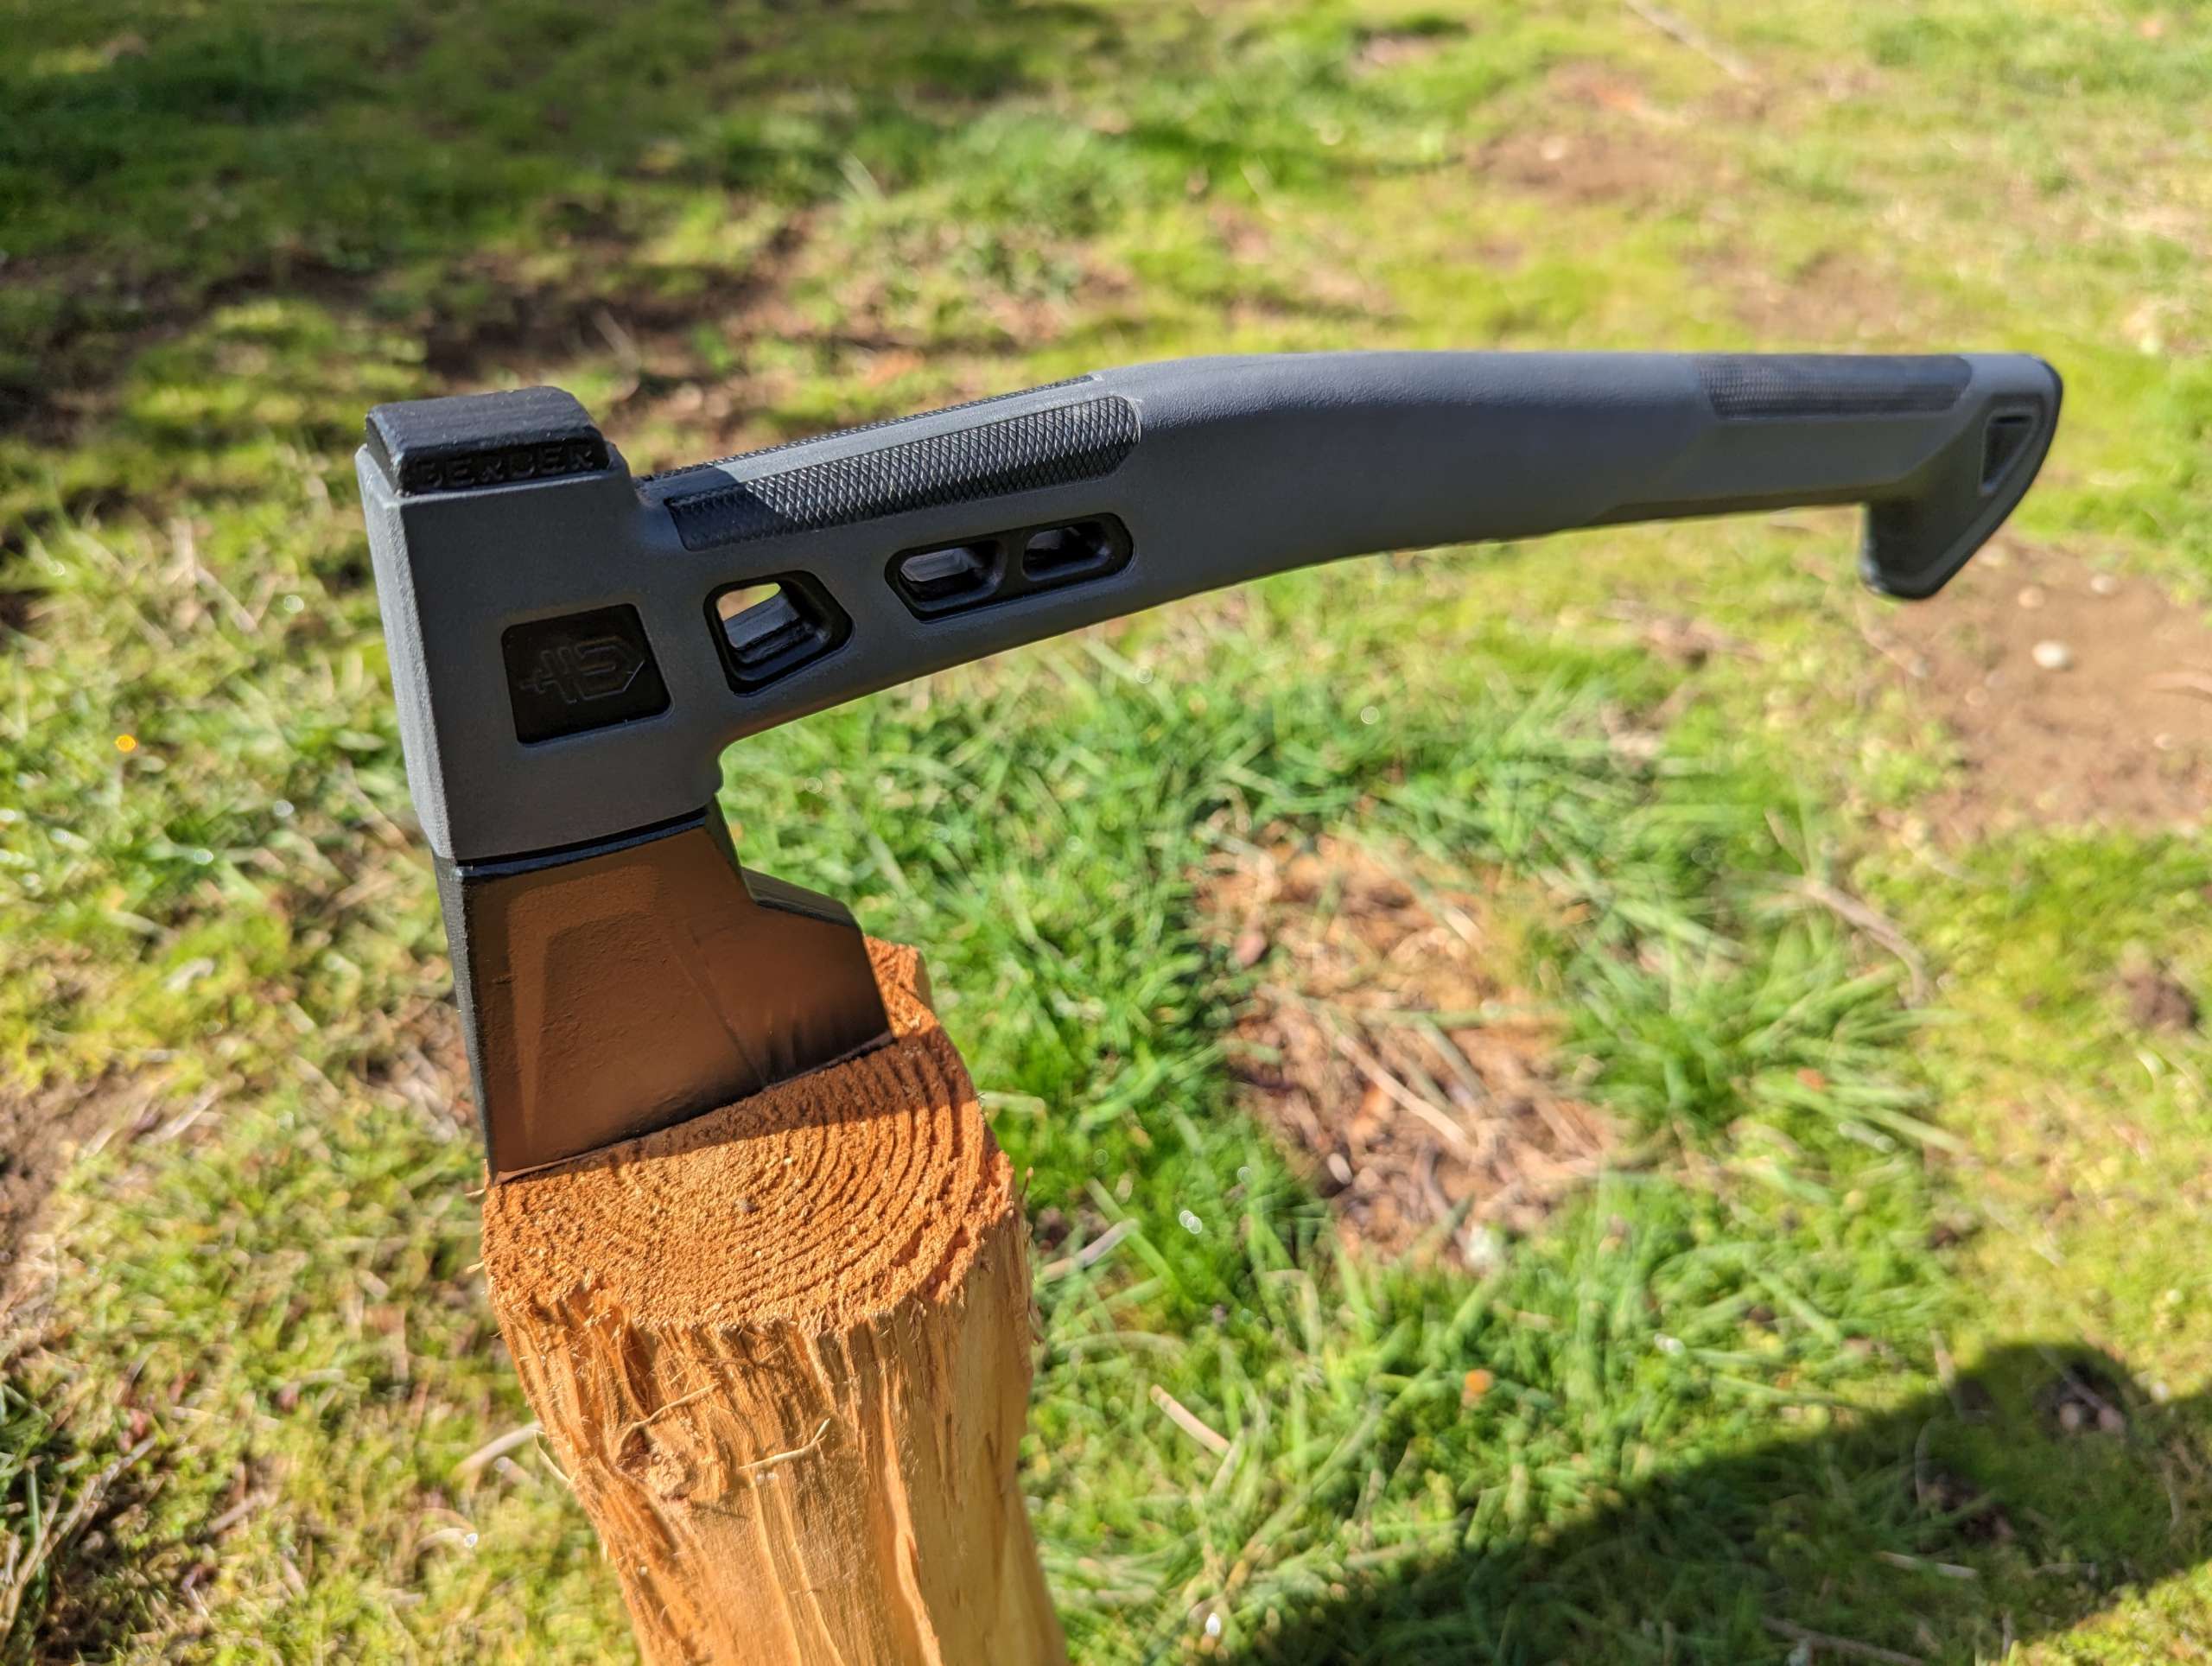 Gerber Bushcraft Hatchet review How much wood could this chop? - The Gadgeteer